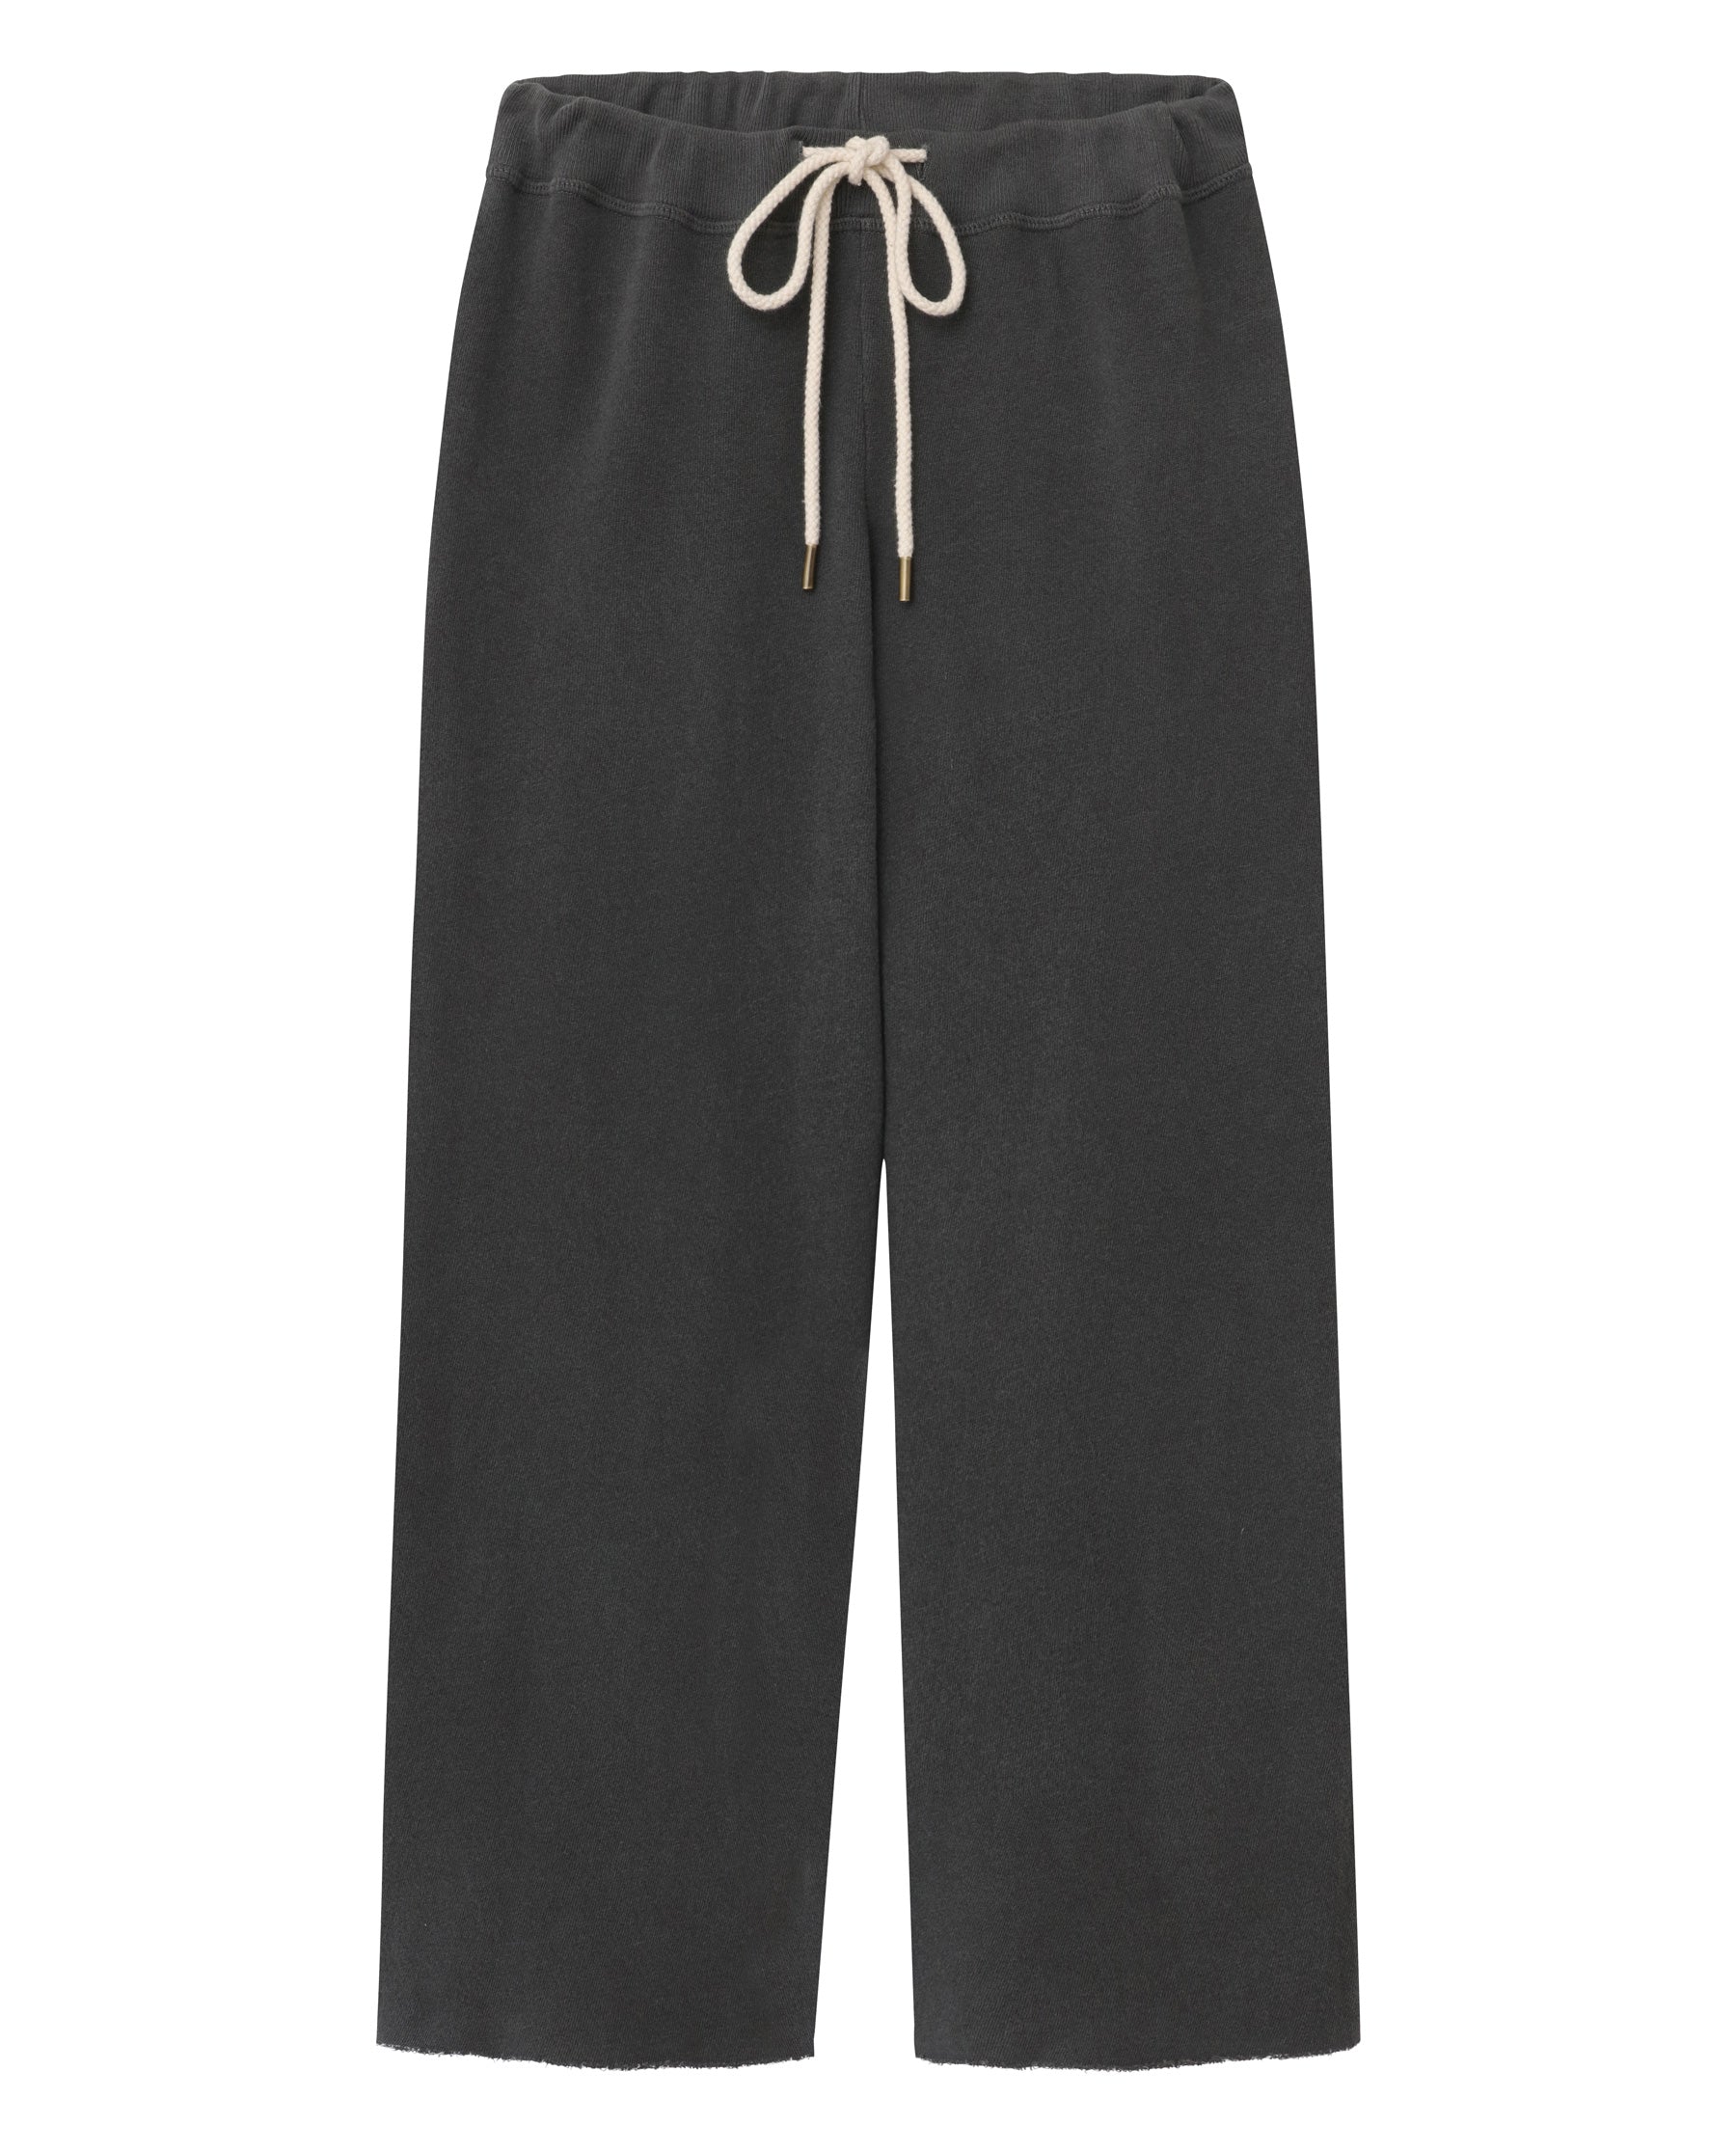 The Wide Leg Cropped Sweatpant. -- WASHED BLACK SWEATPANTS THE GREAT. CORE KNITS